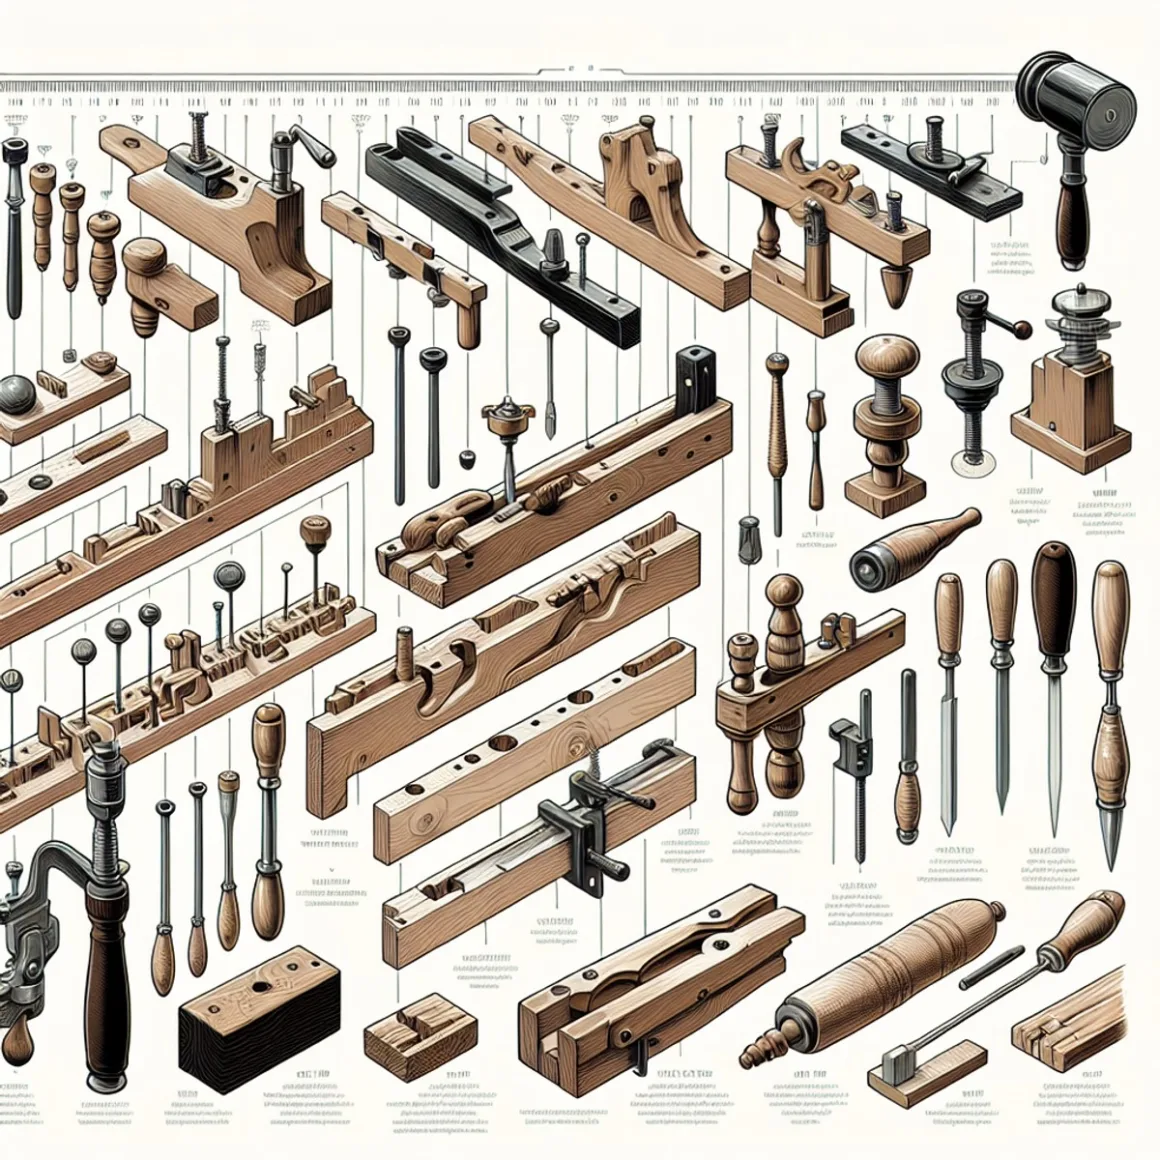 A timeline showcasing the evolution of woodworking tools and joint styles, from early to contemporary designs, with detailed and symbolic representations of each tool and joint.